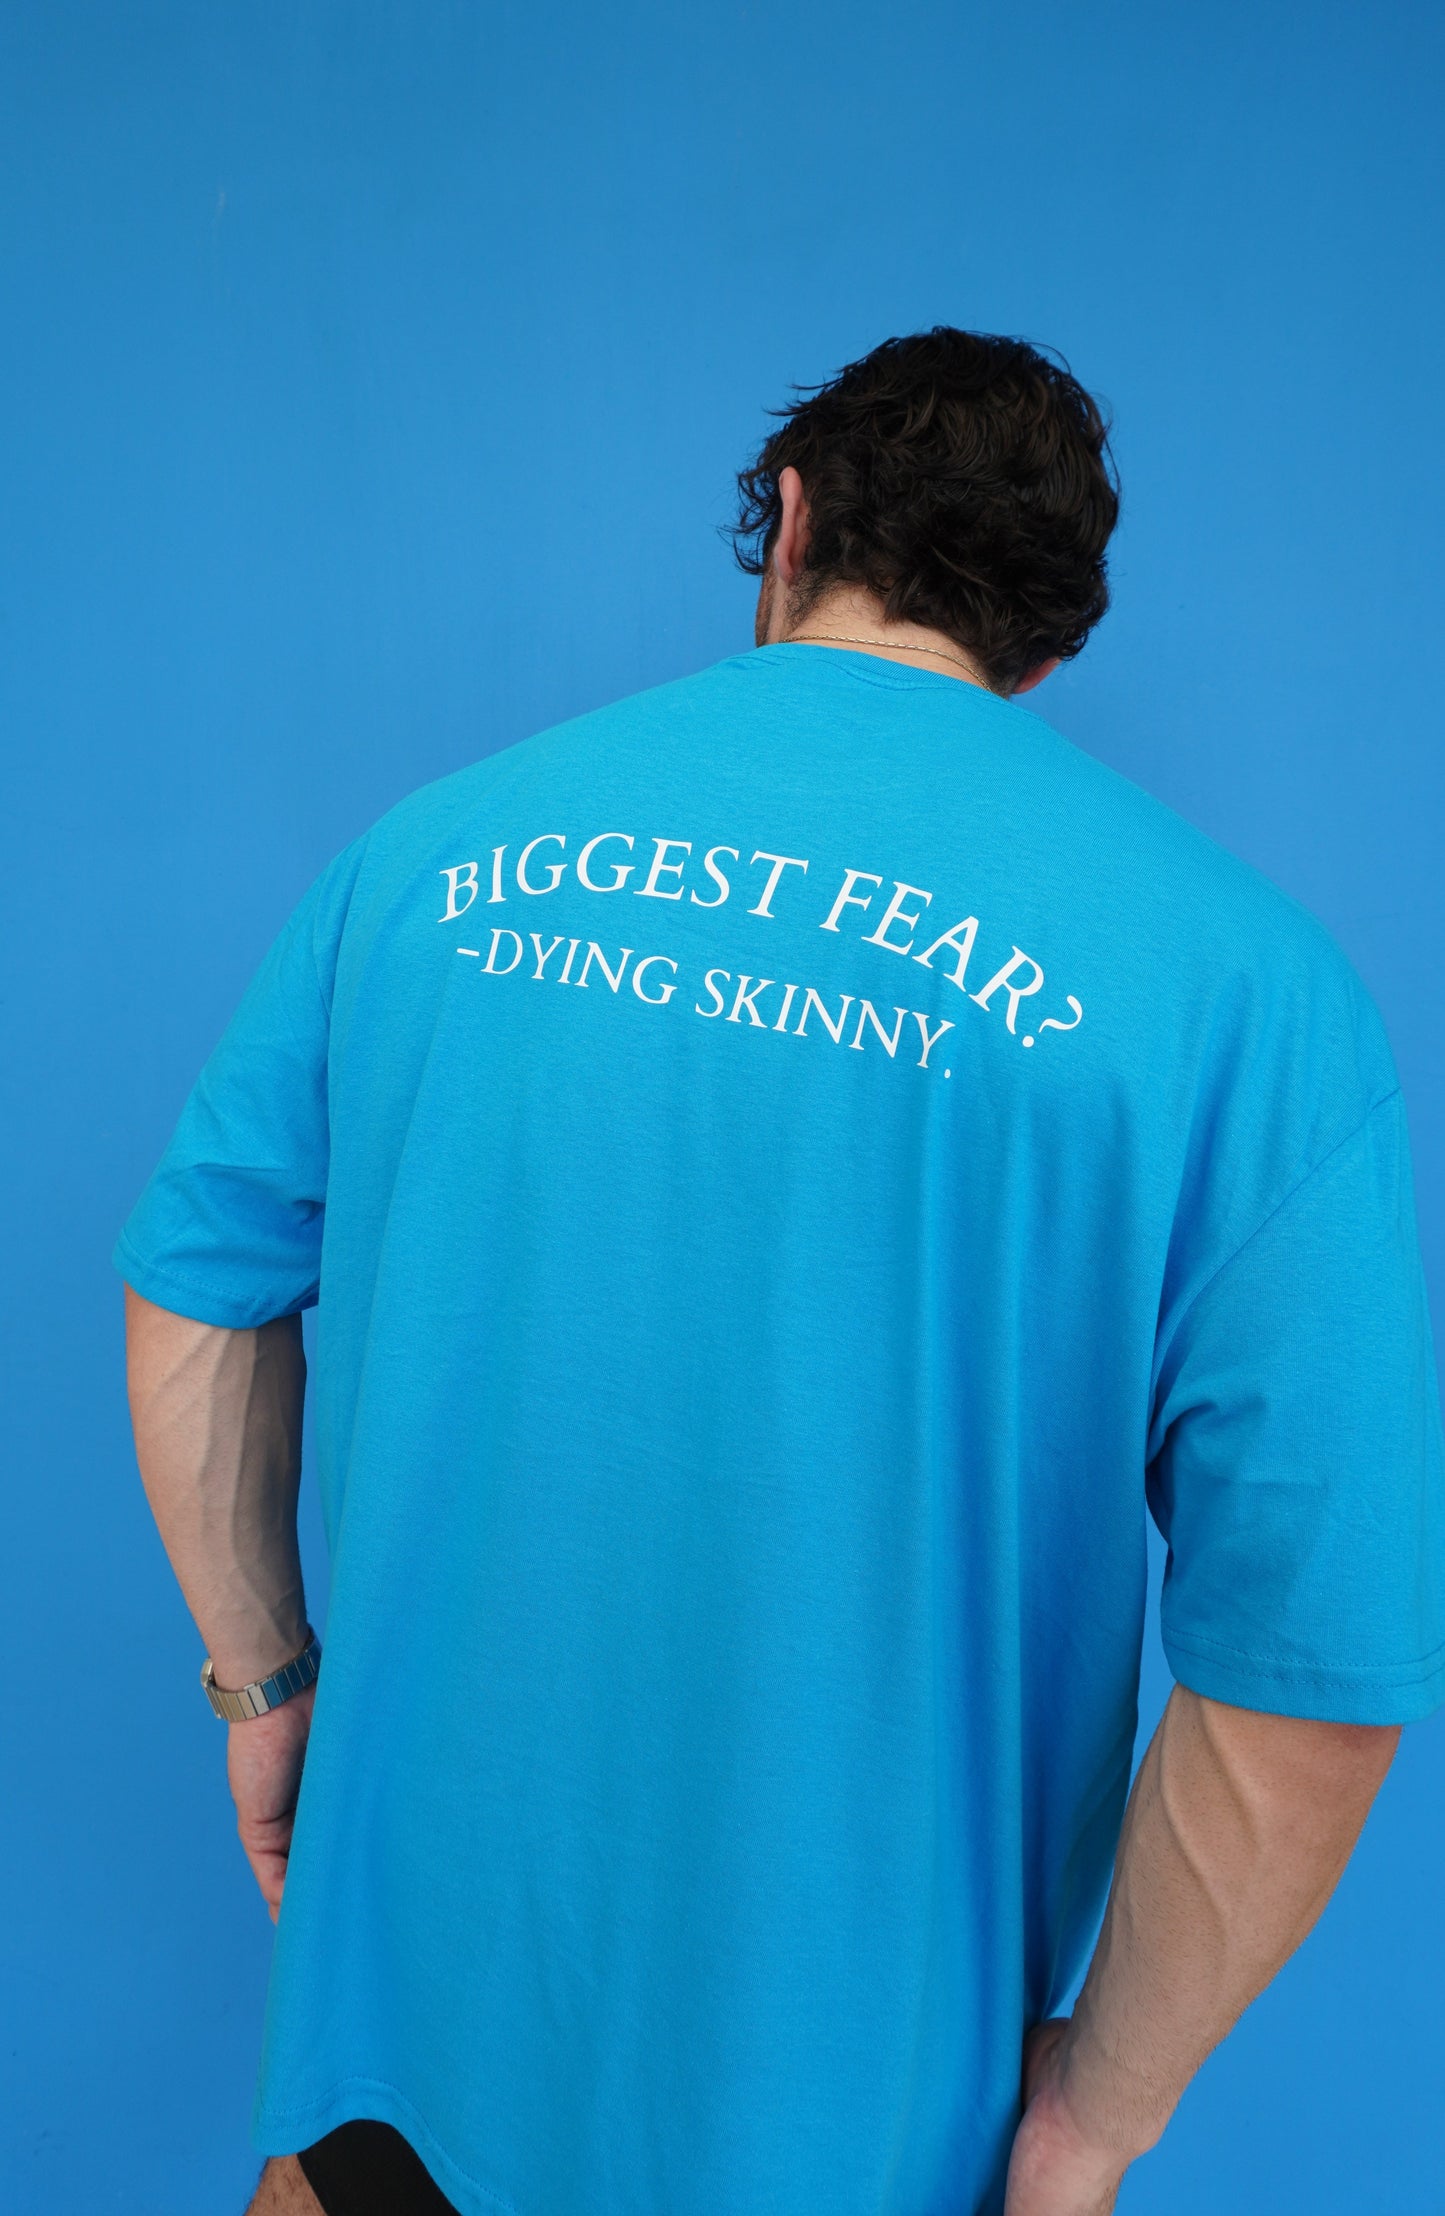 OVERSIZE "BIGGEST FEAR? DYING SKINNY"